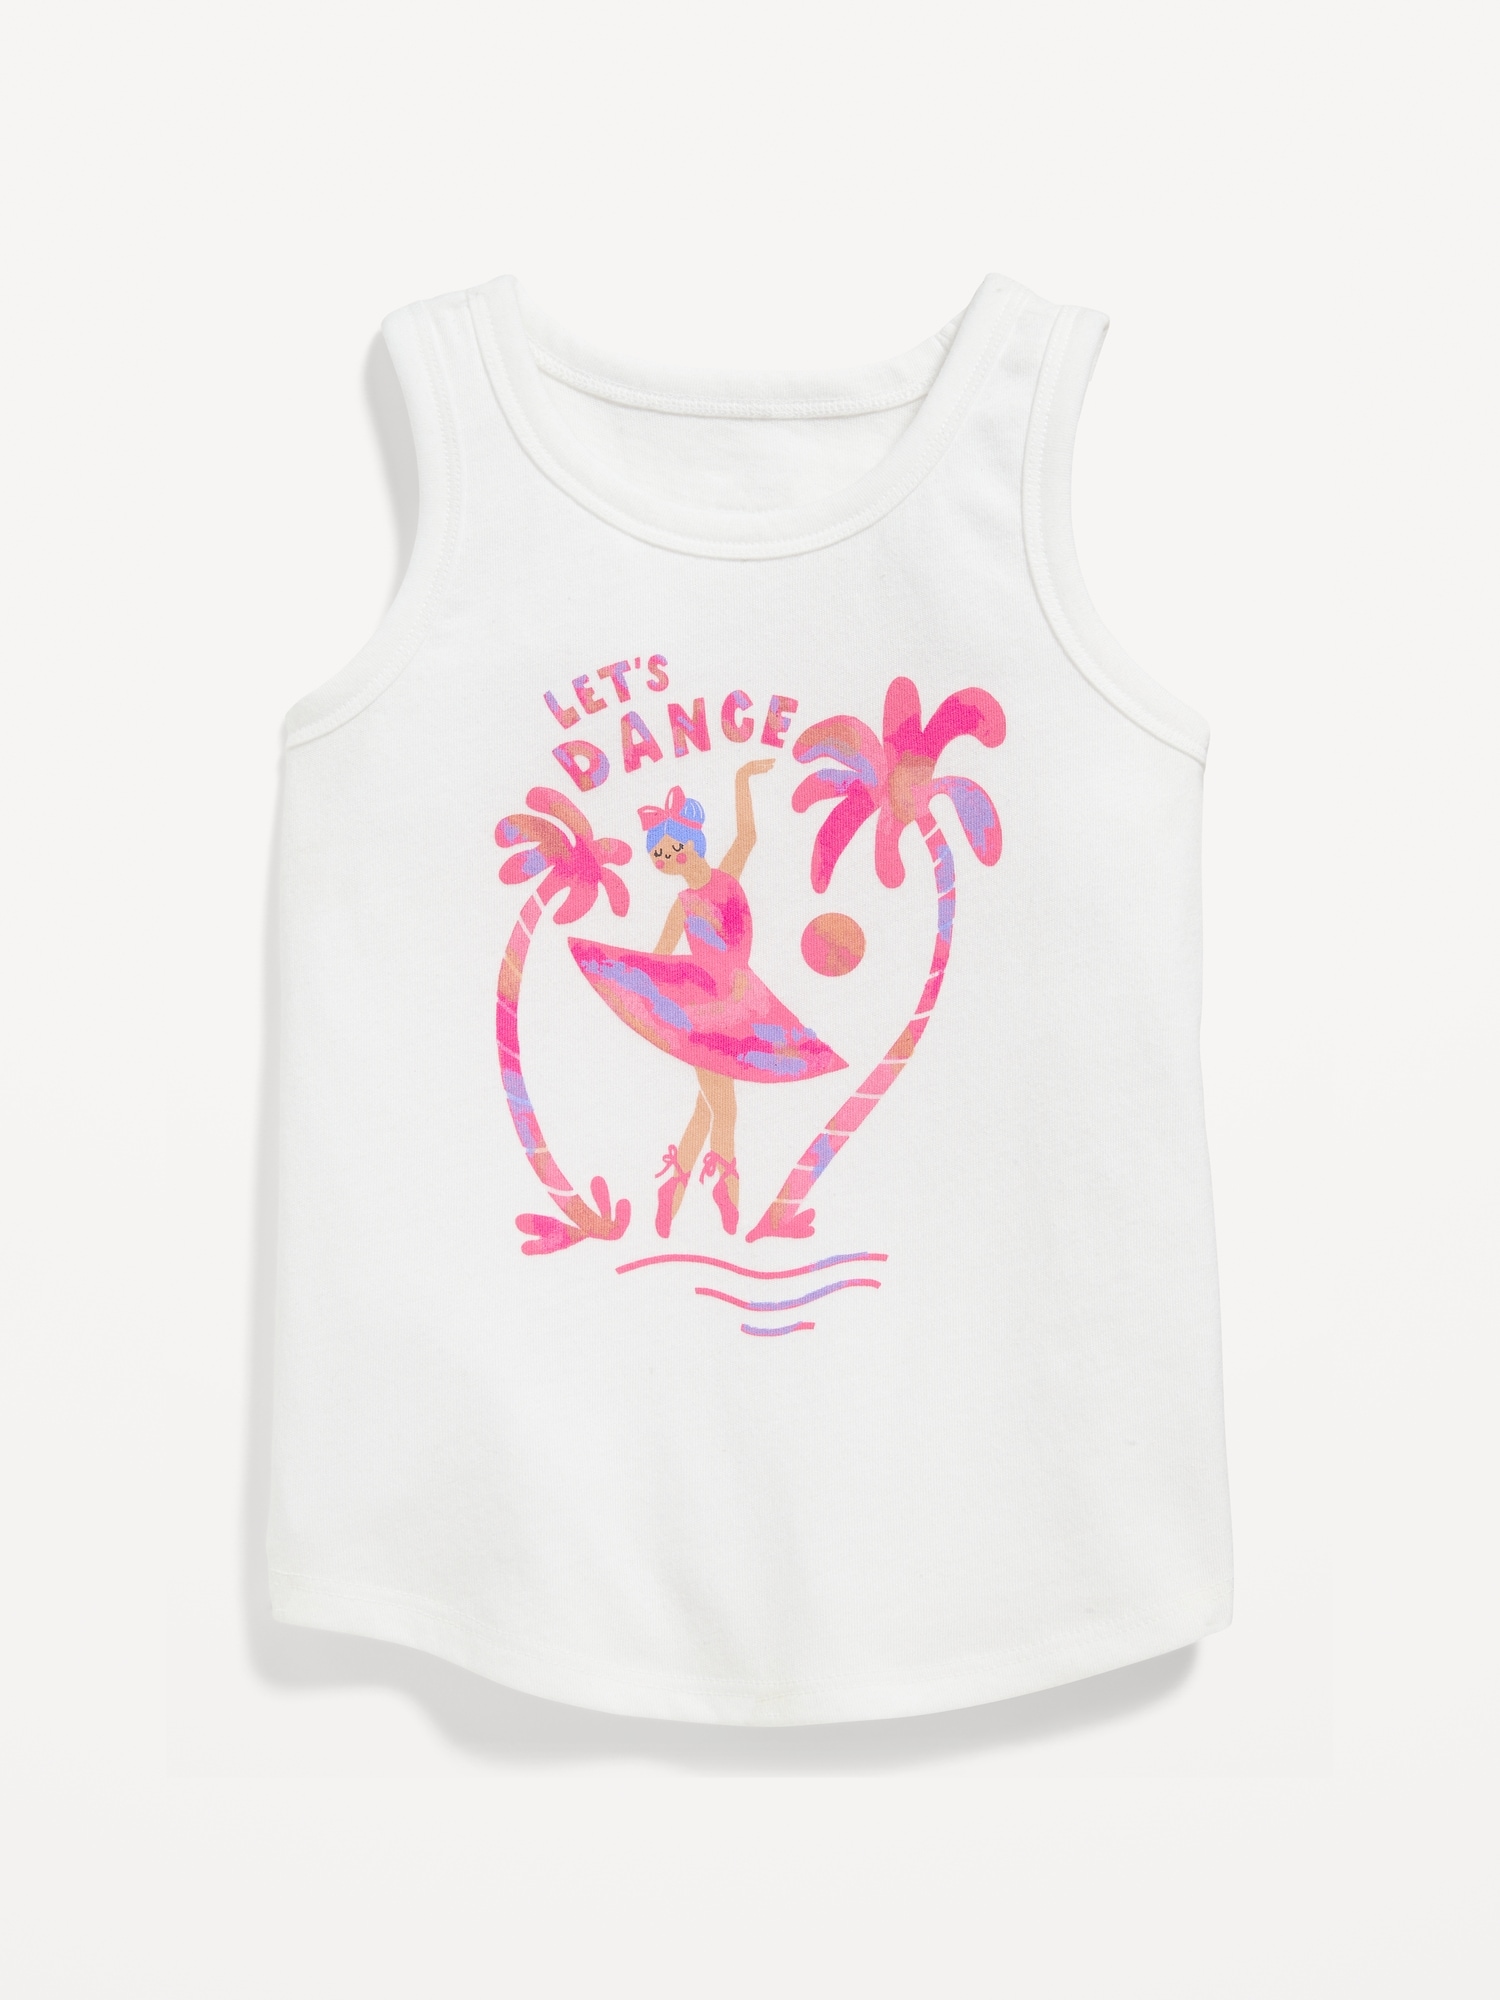 Old Navy Graphic Tank Top for Toddler Girls white. 1